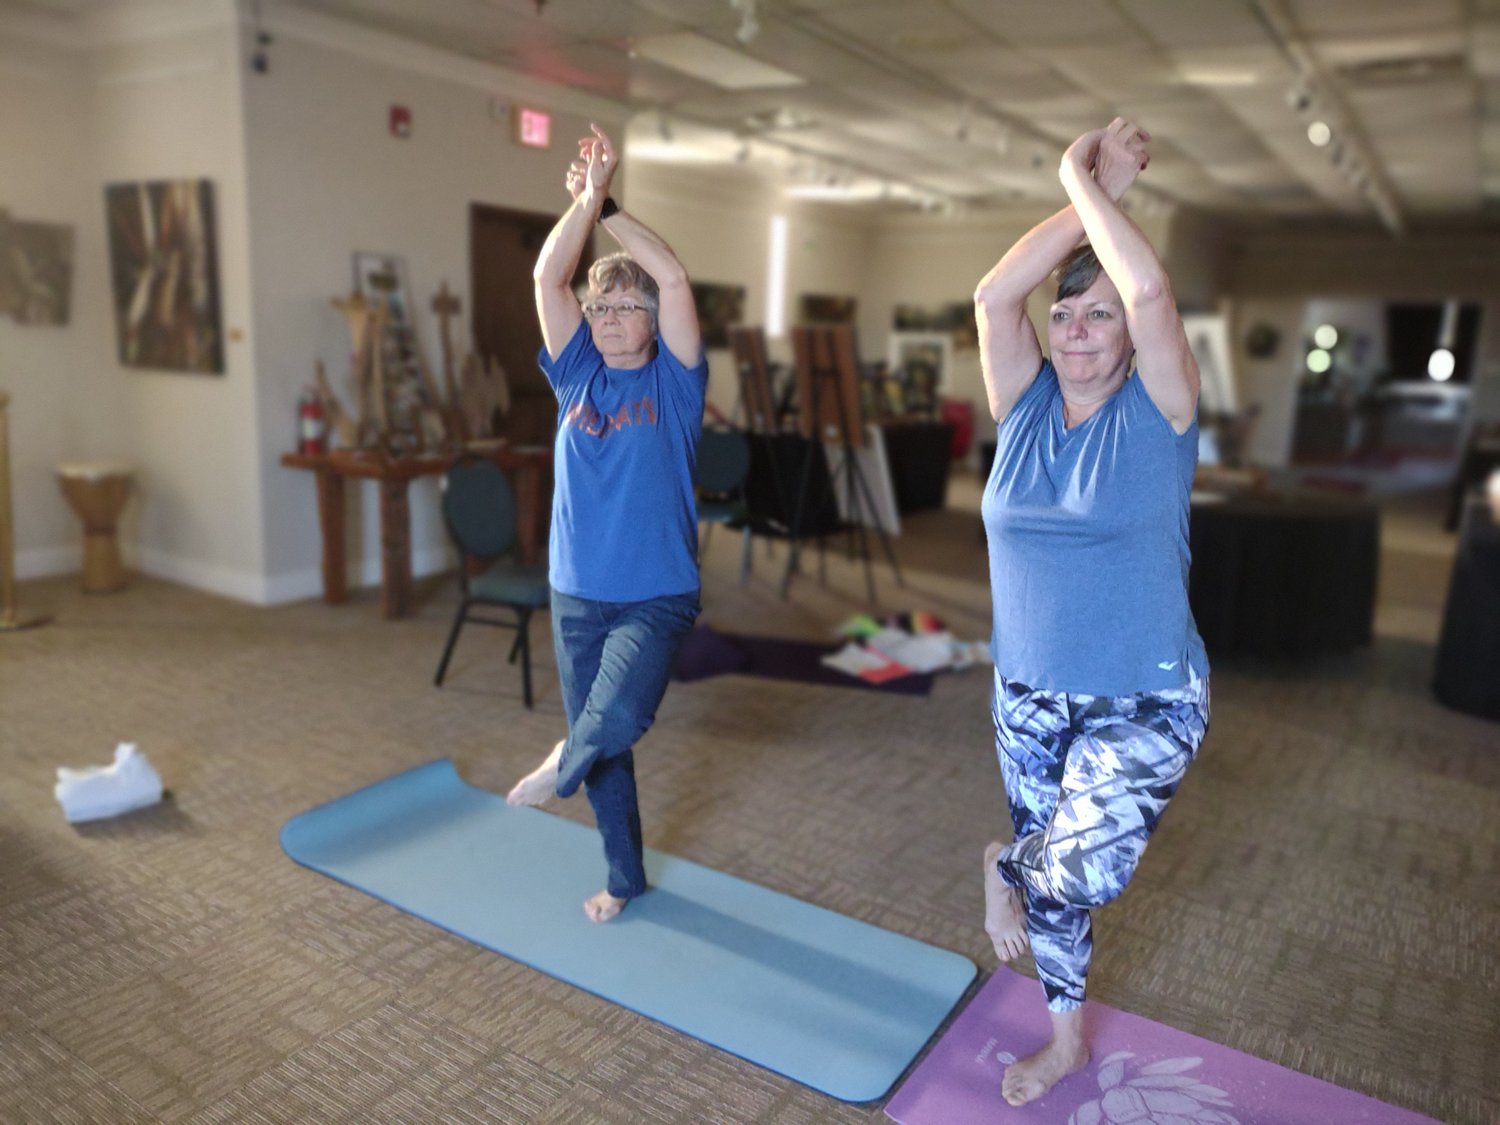 This Yoga practice honors the strength of the “Eagle” in initiating “Eagle Poise.”